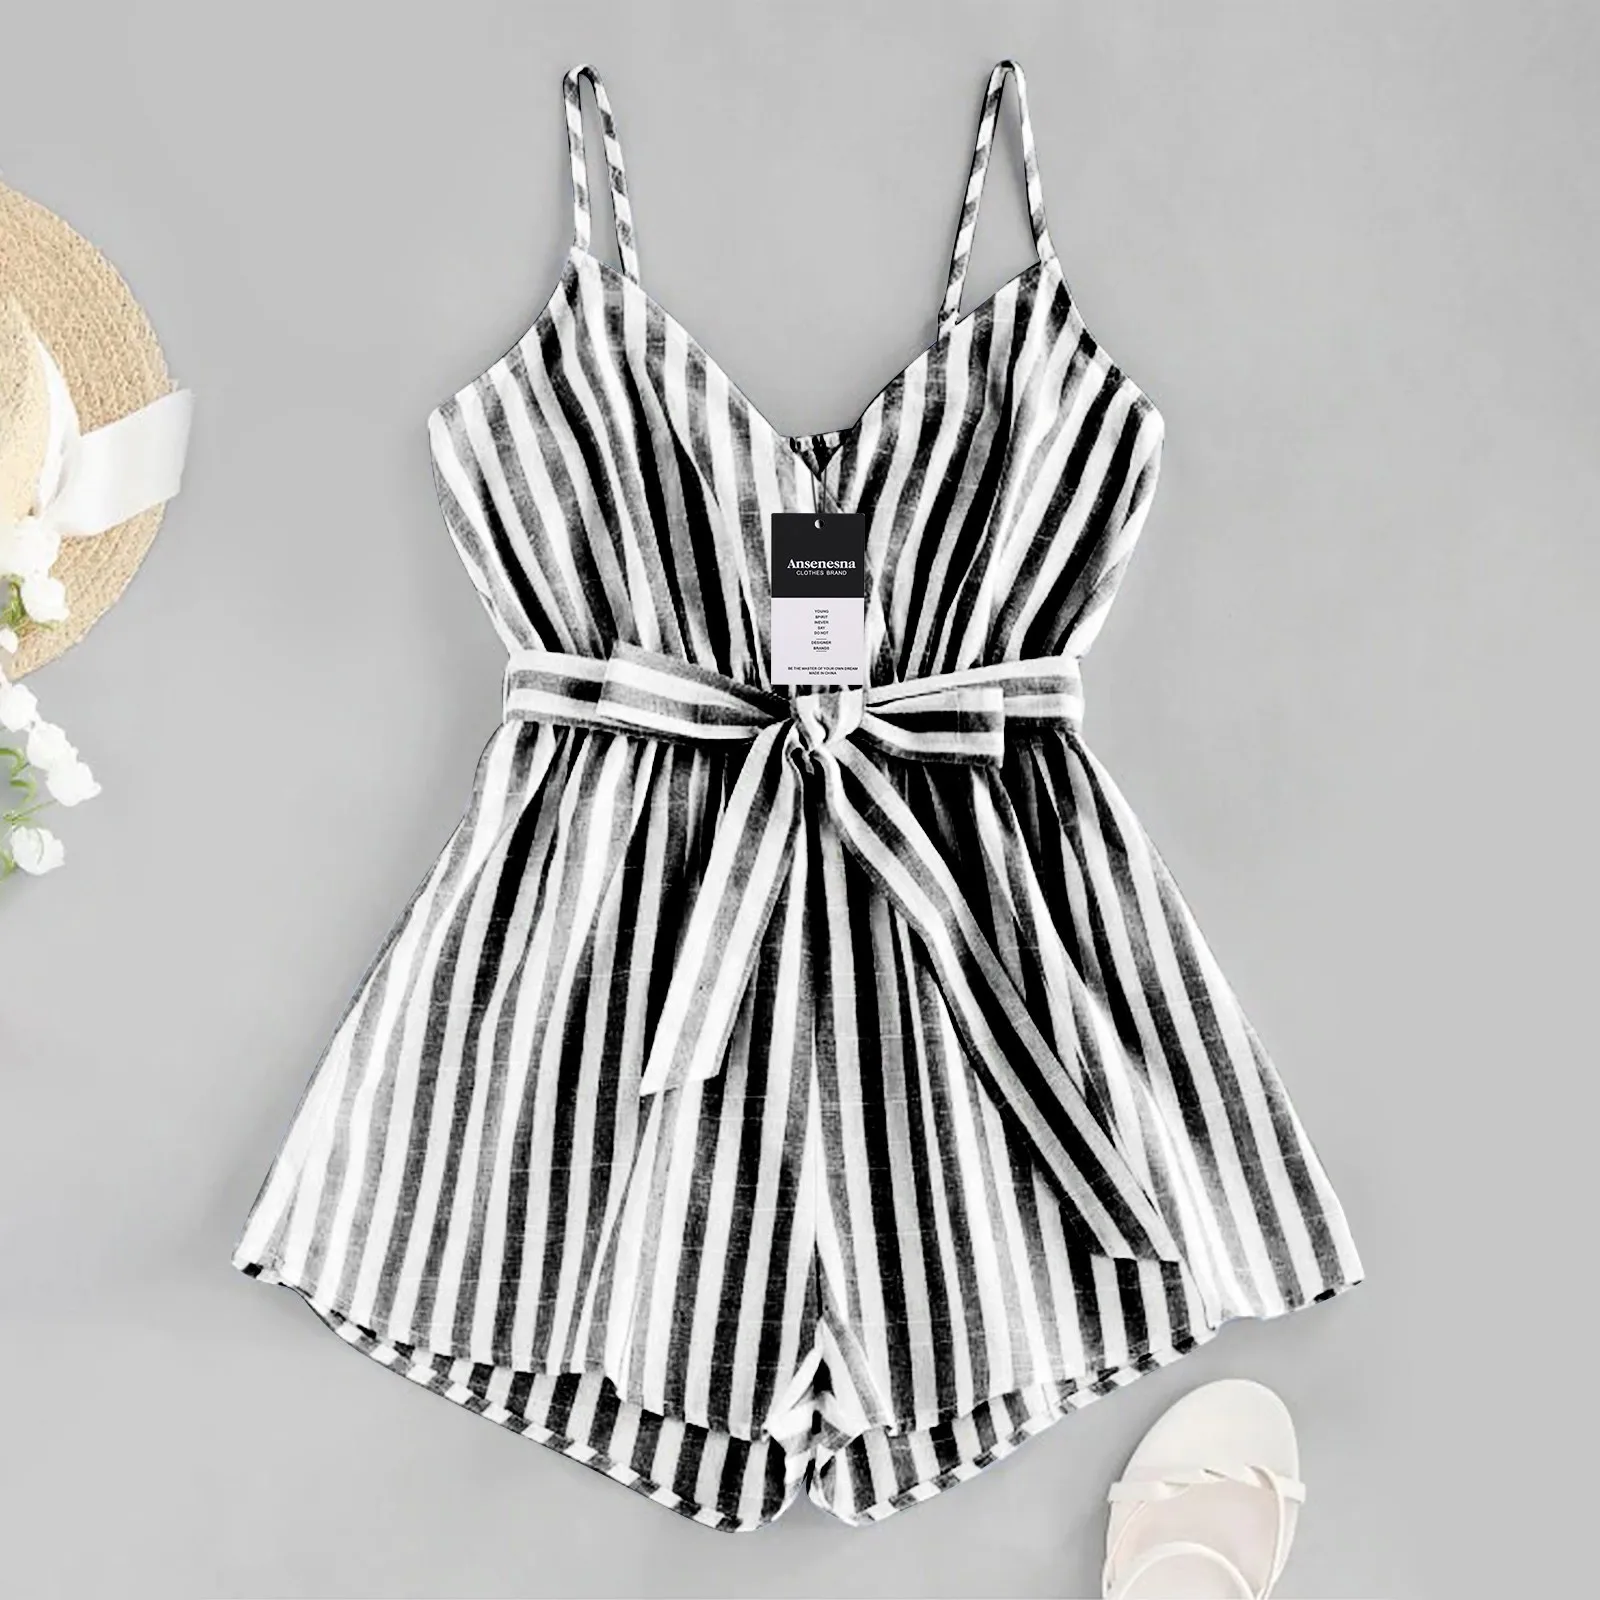 Jumpsuit Shorts Womens Summer Suspenders Jumpsuit Casual Stripe Printing Loose Sleeveless V-neck Shorts